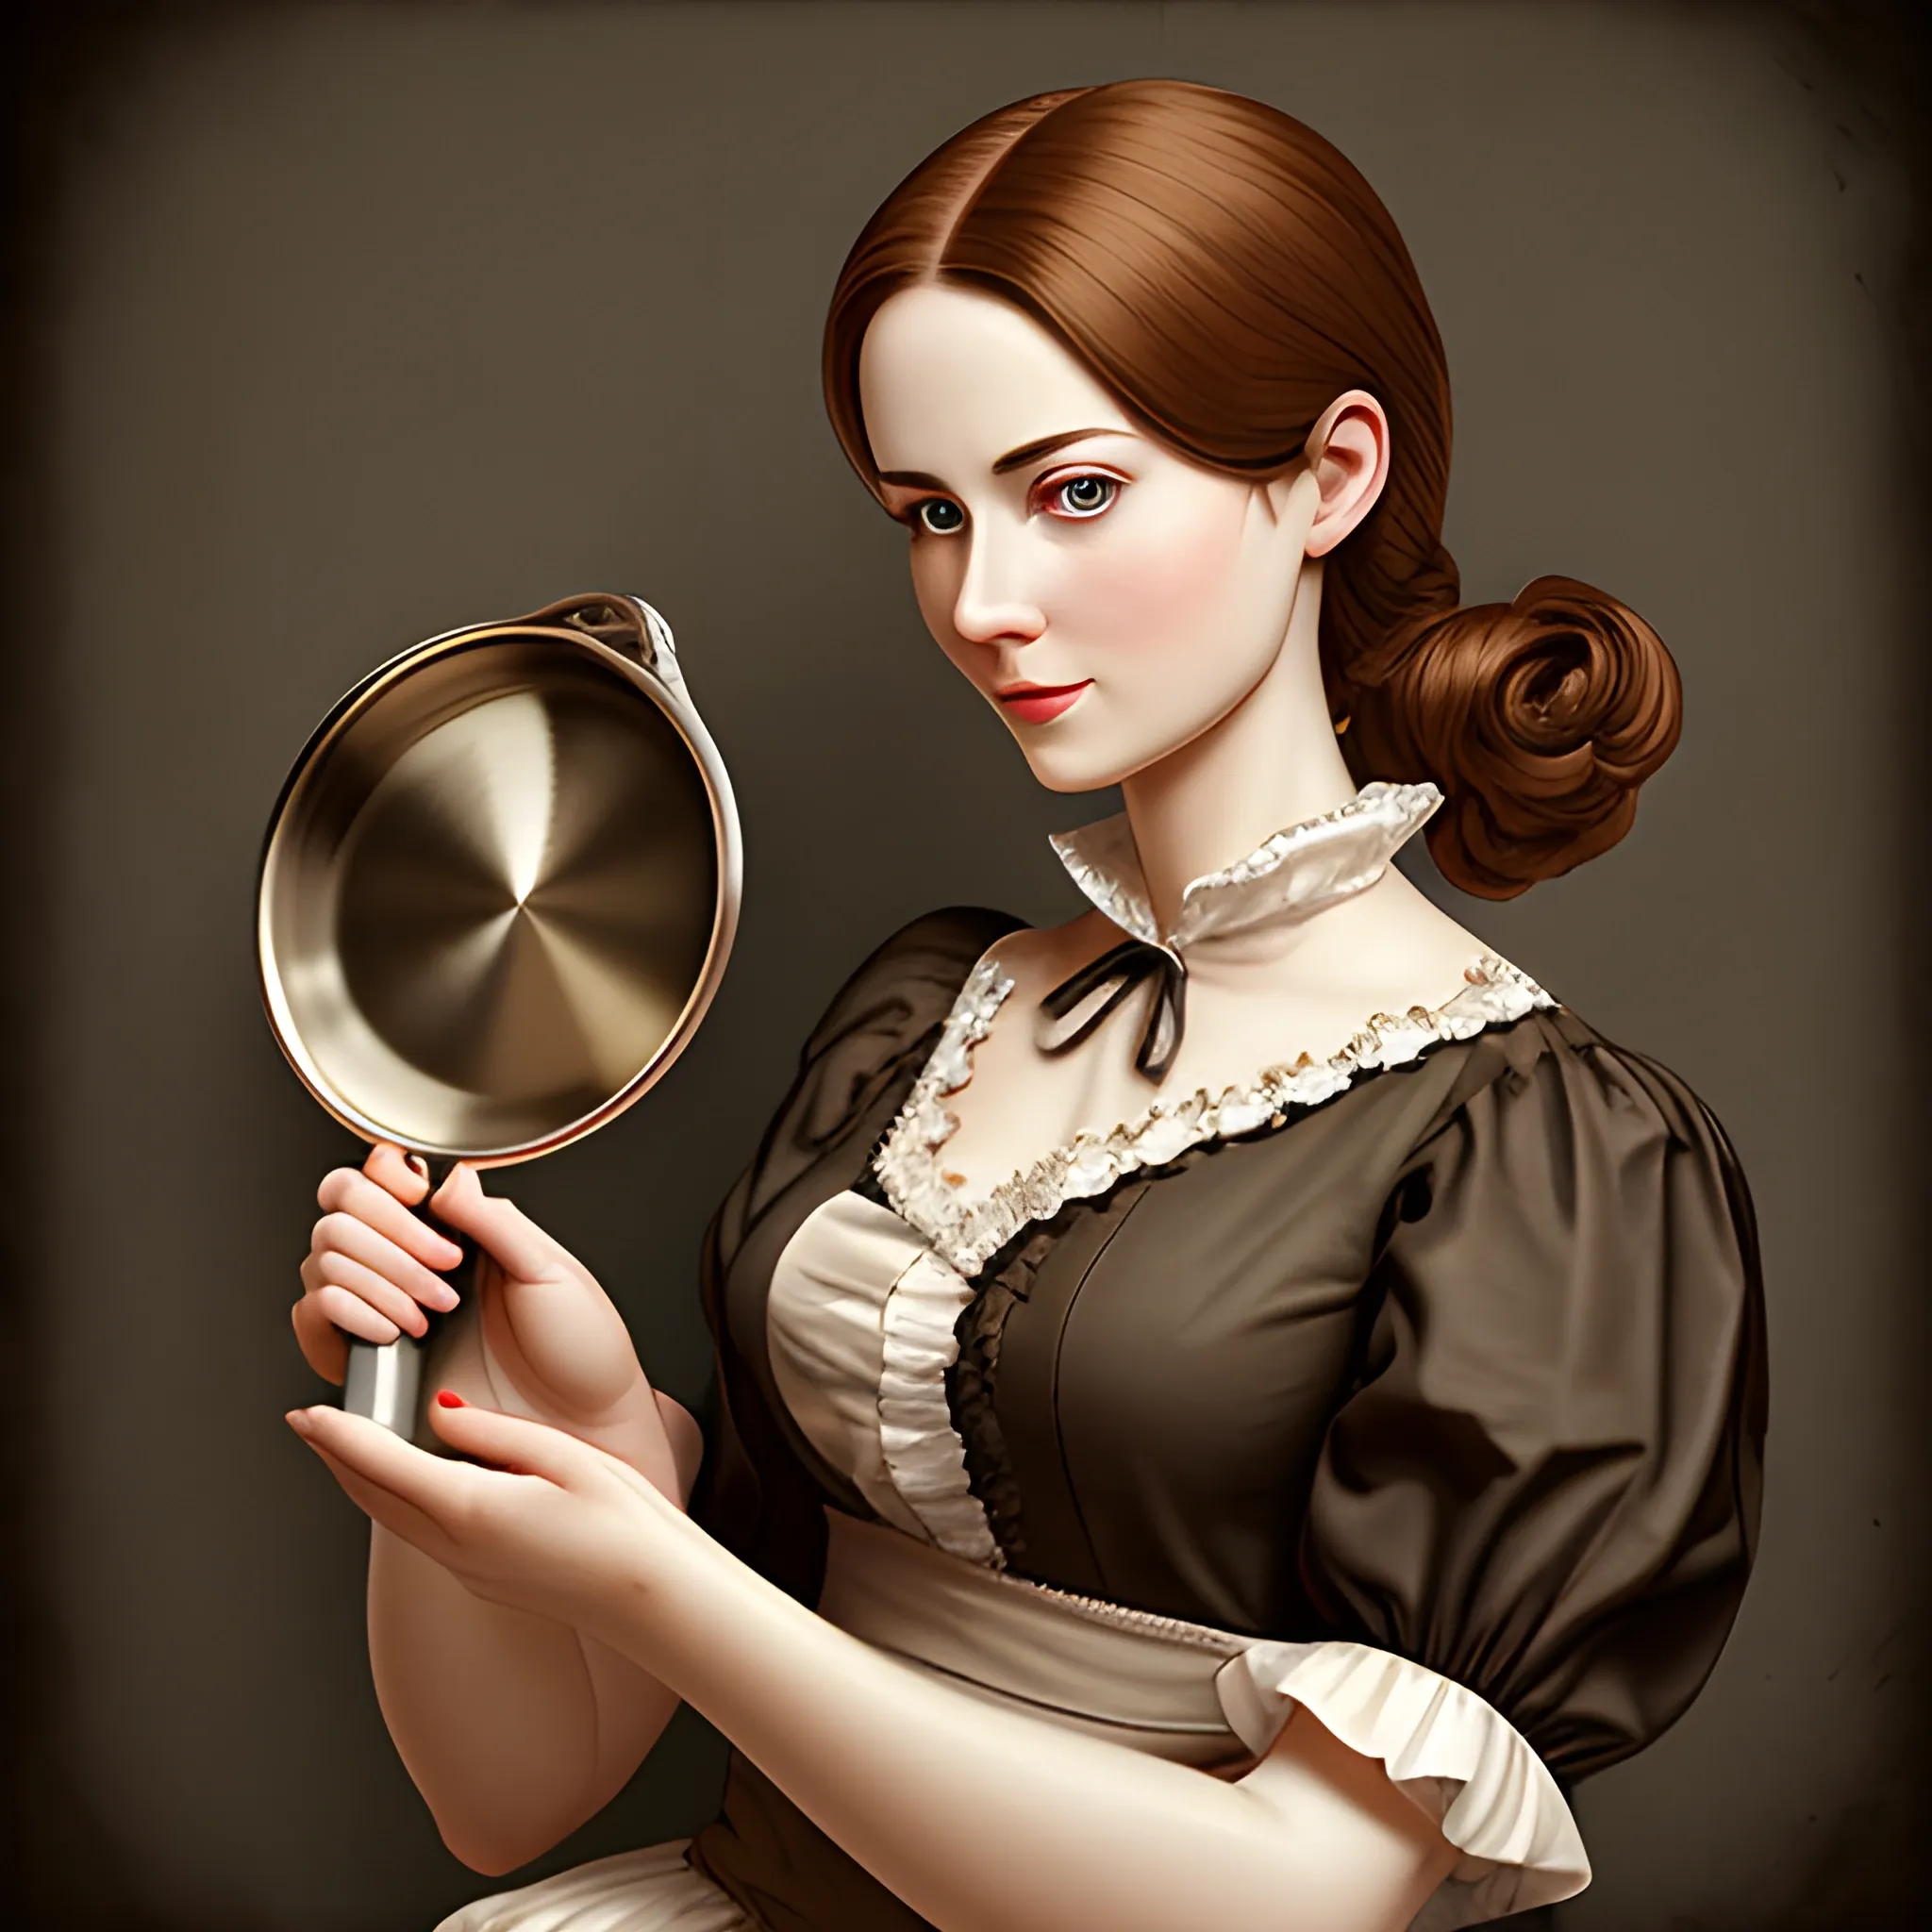 An elegant lady holdingf a frying pan, eye-catching detail, realistic ultra-detailed